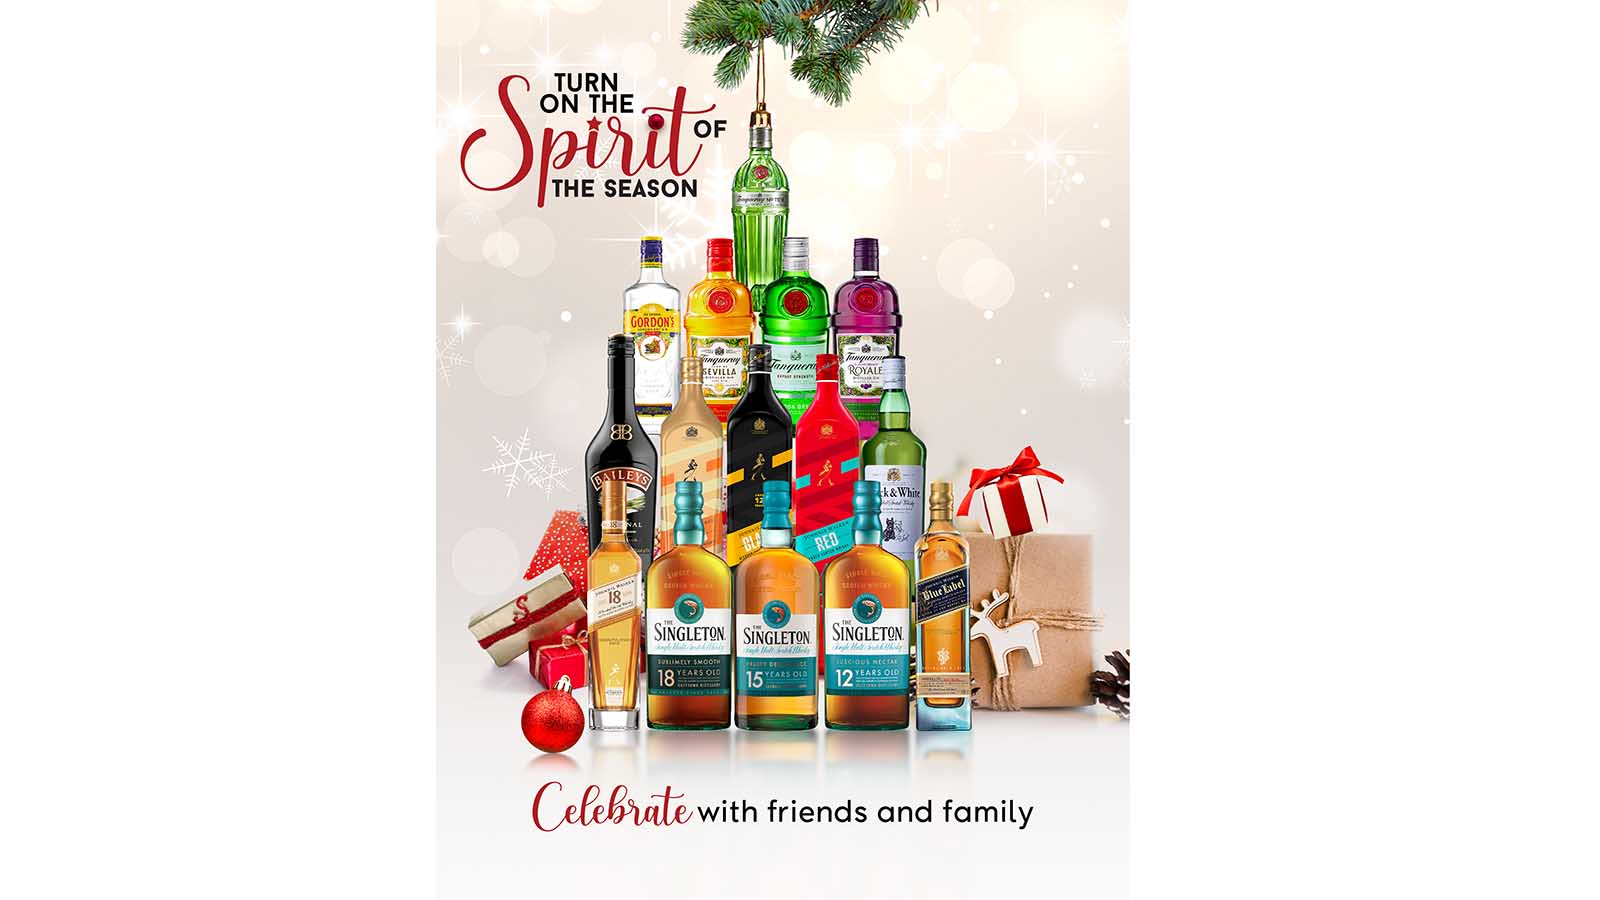 Diageo’s subsidiaries in South Africa, Kenya bring festive cheer to consumers